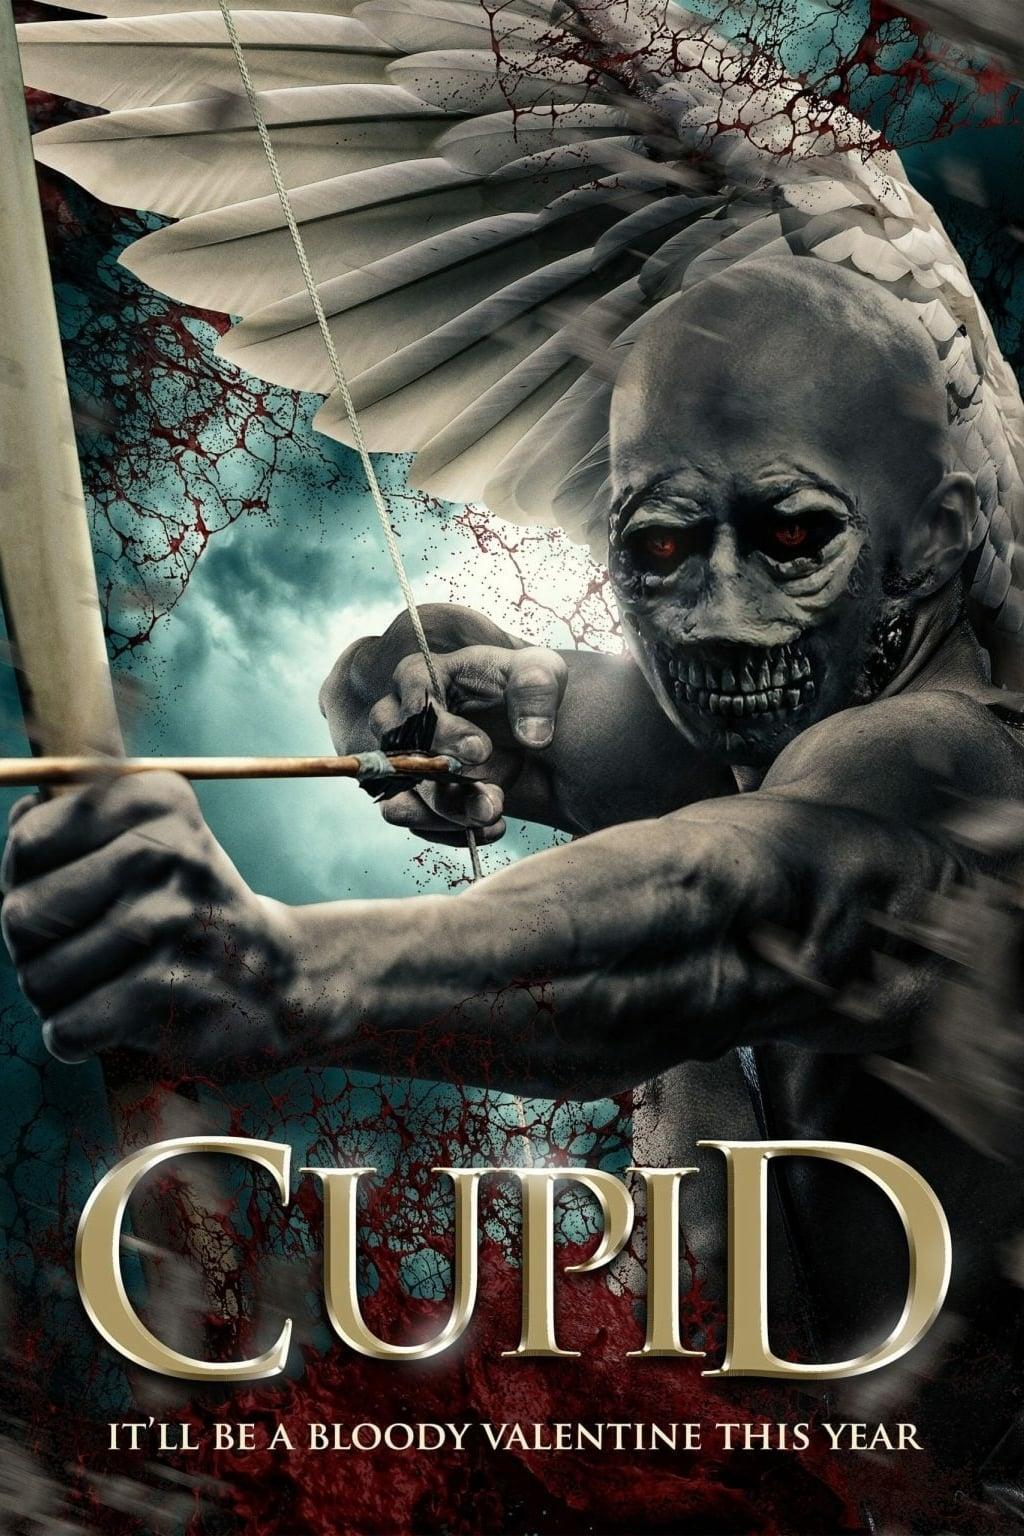 Cupid poster